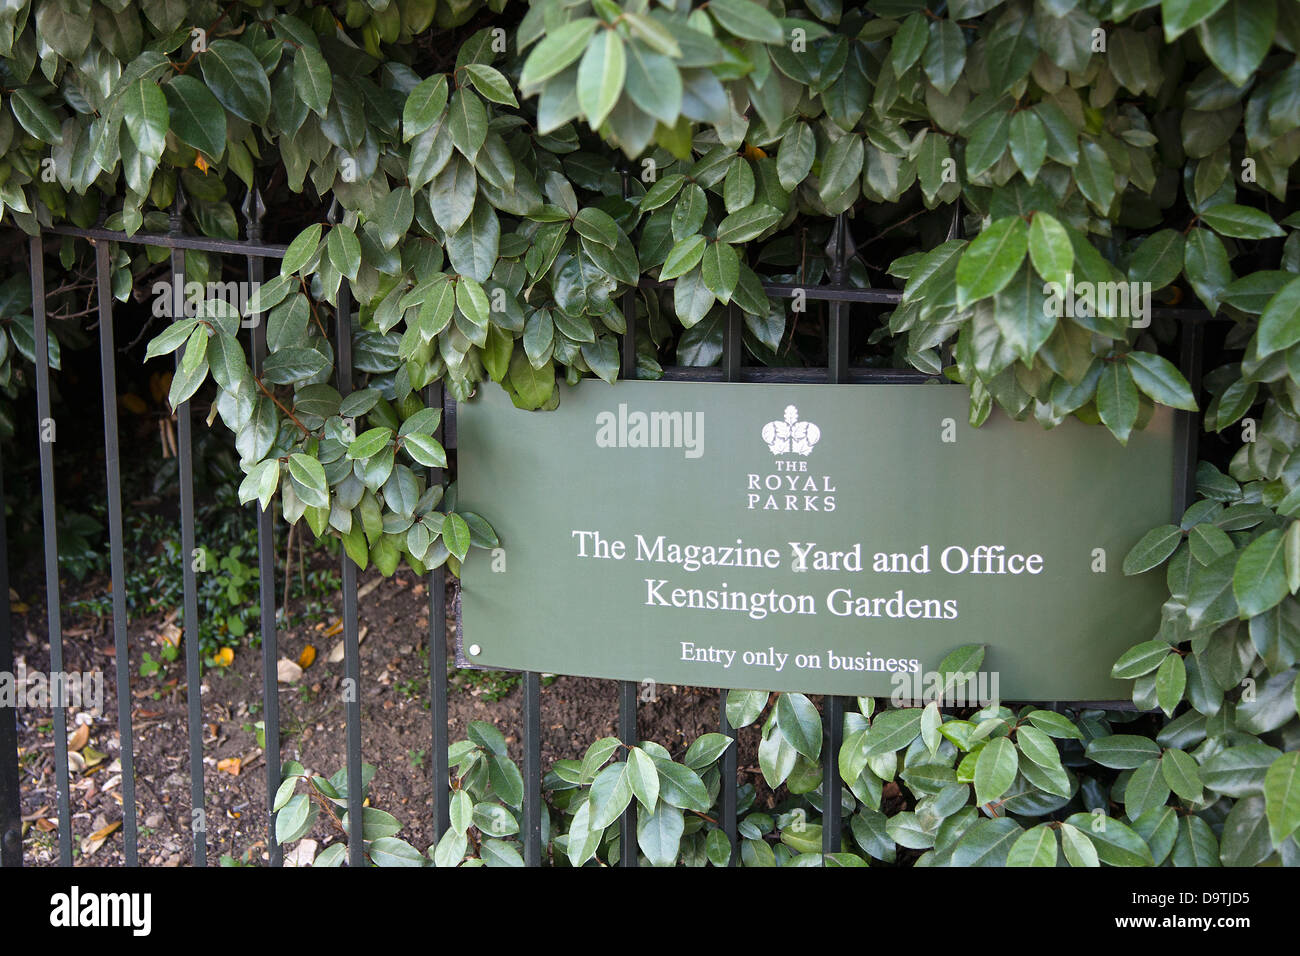 Sign for the Magazine Yard and Office, Kensington Gardens, London, UK Stock Photo